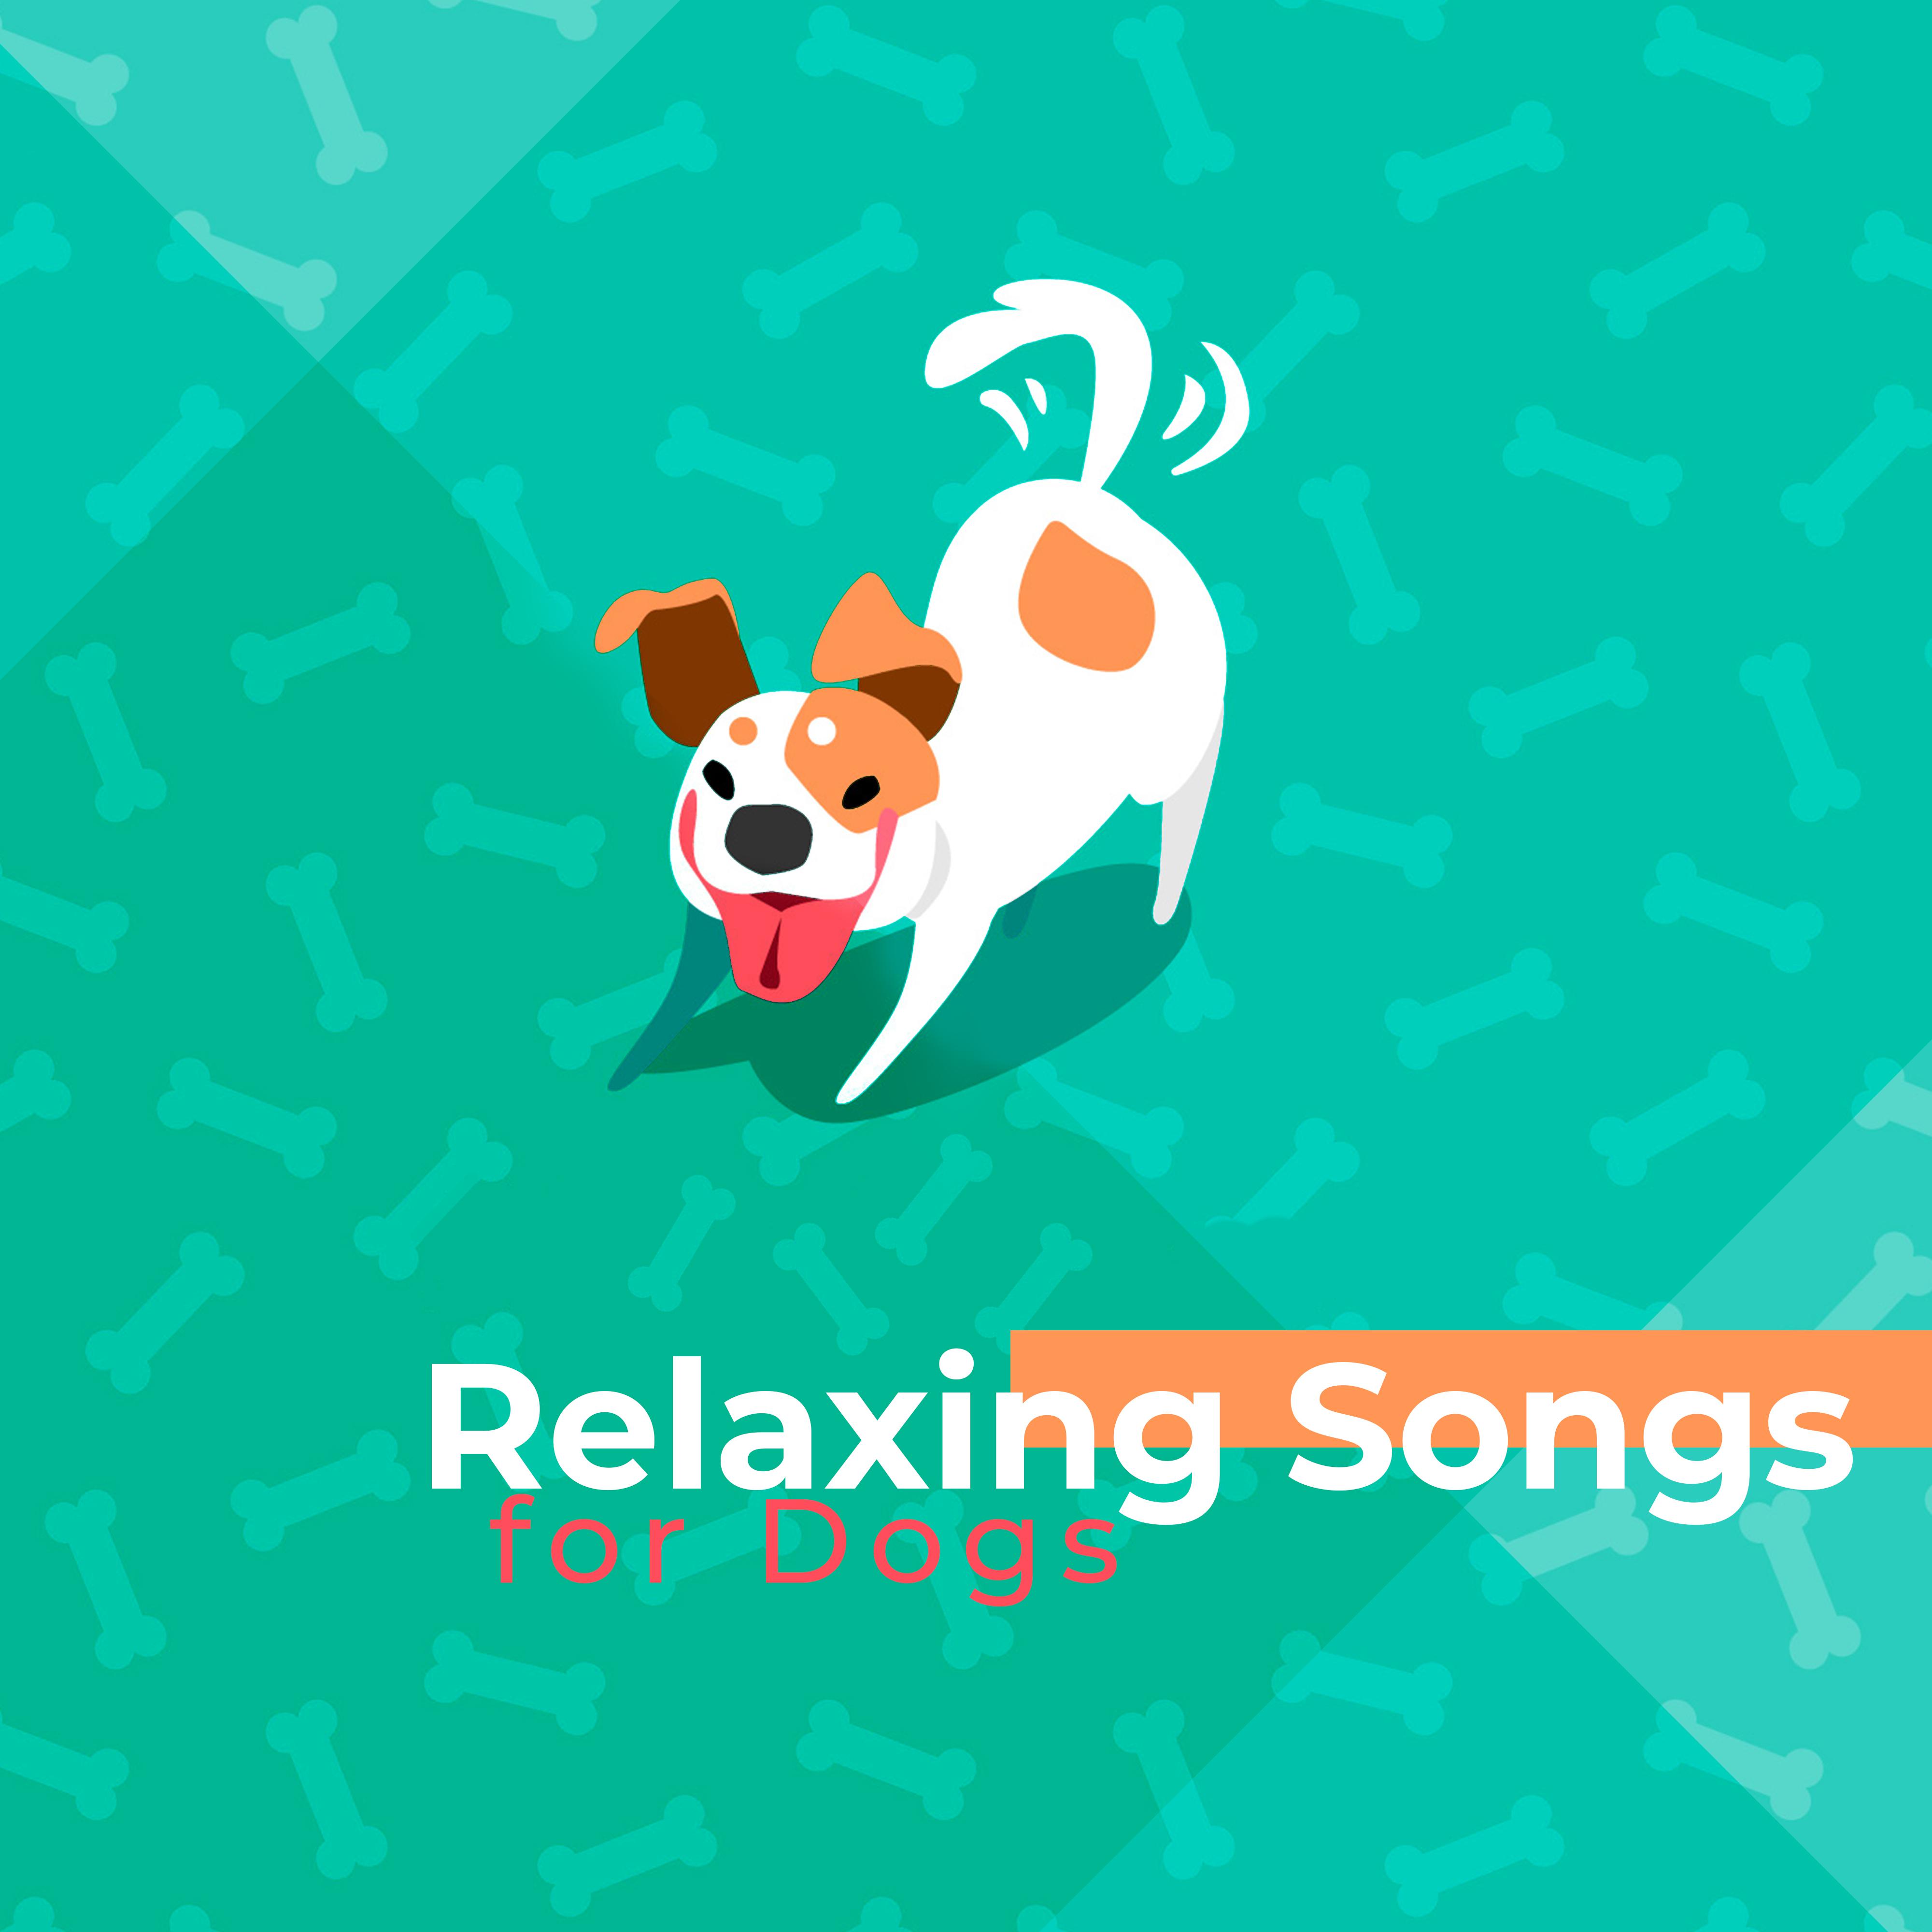 Relaxing Songs for Dogs - Relaxing Melodies for Dogs, Calm Down, Sleep, Pet Sounds, New Age Music 2019